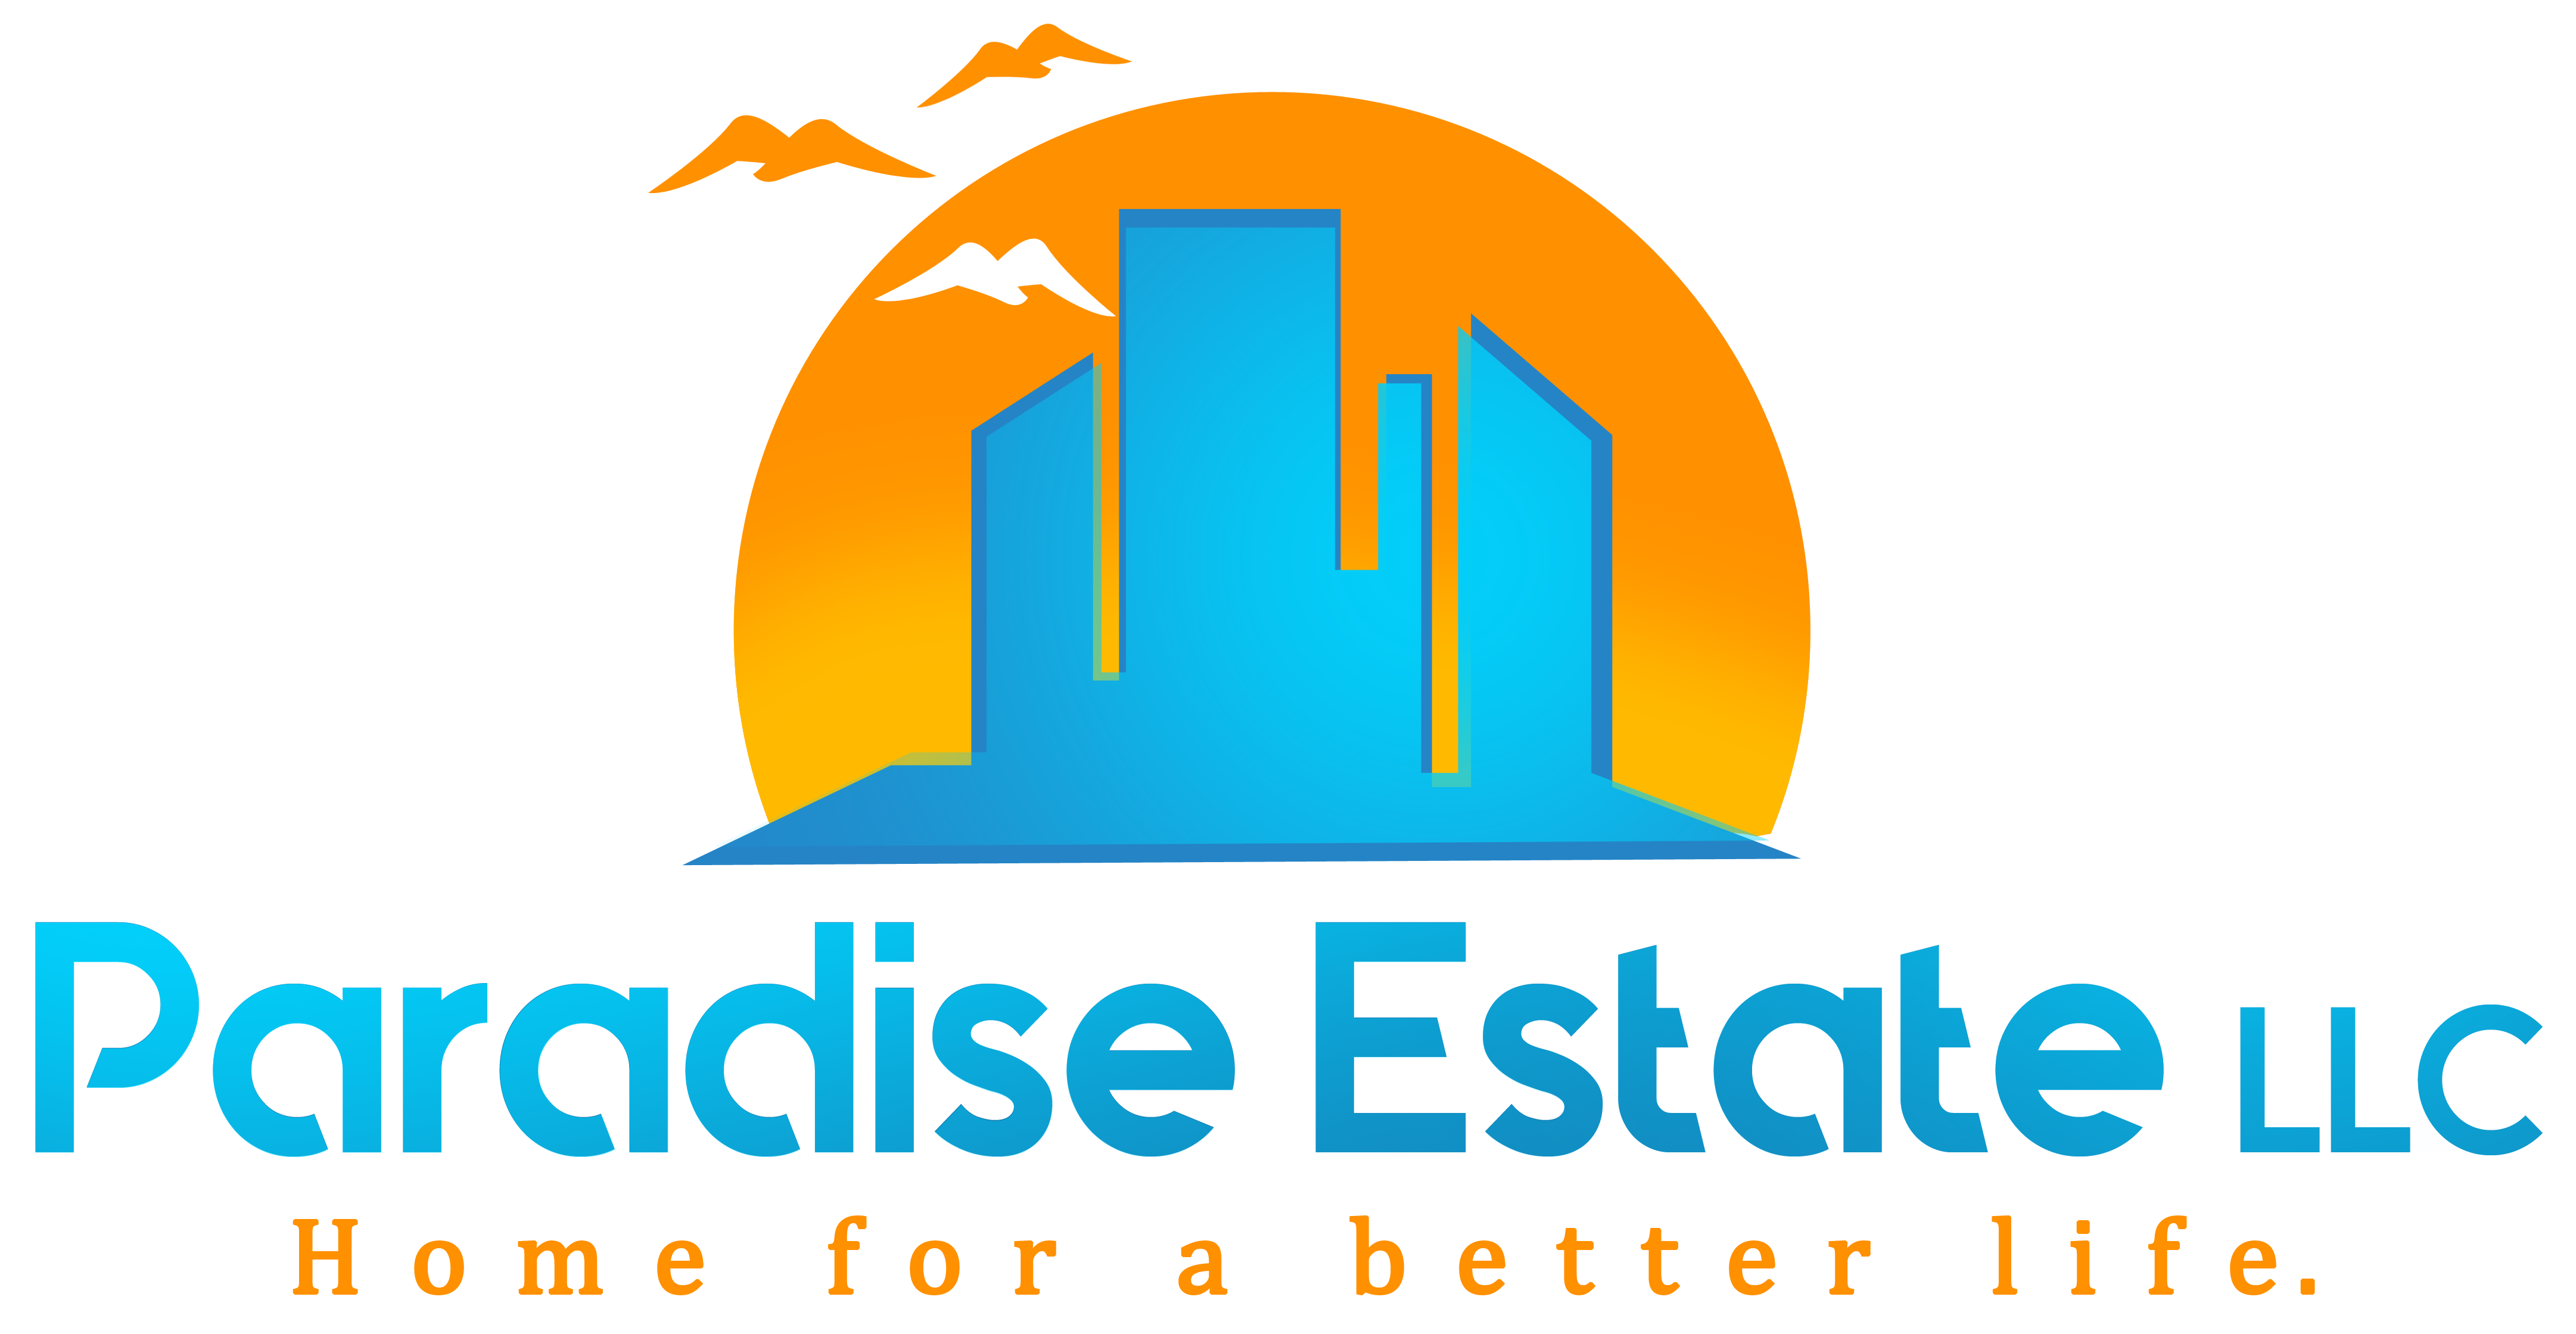 Meet Paradise Estate, A Real Estate Company Promoting People Over Profits